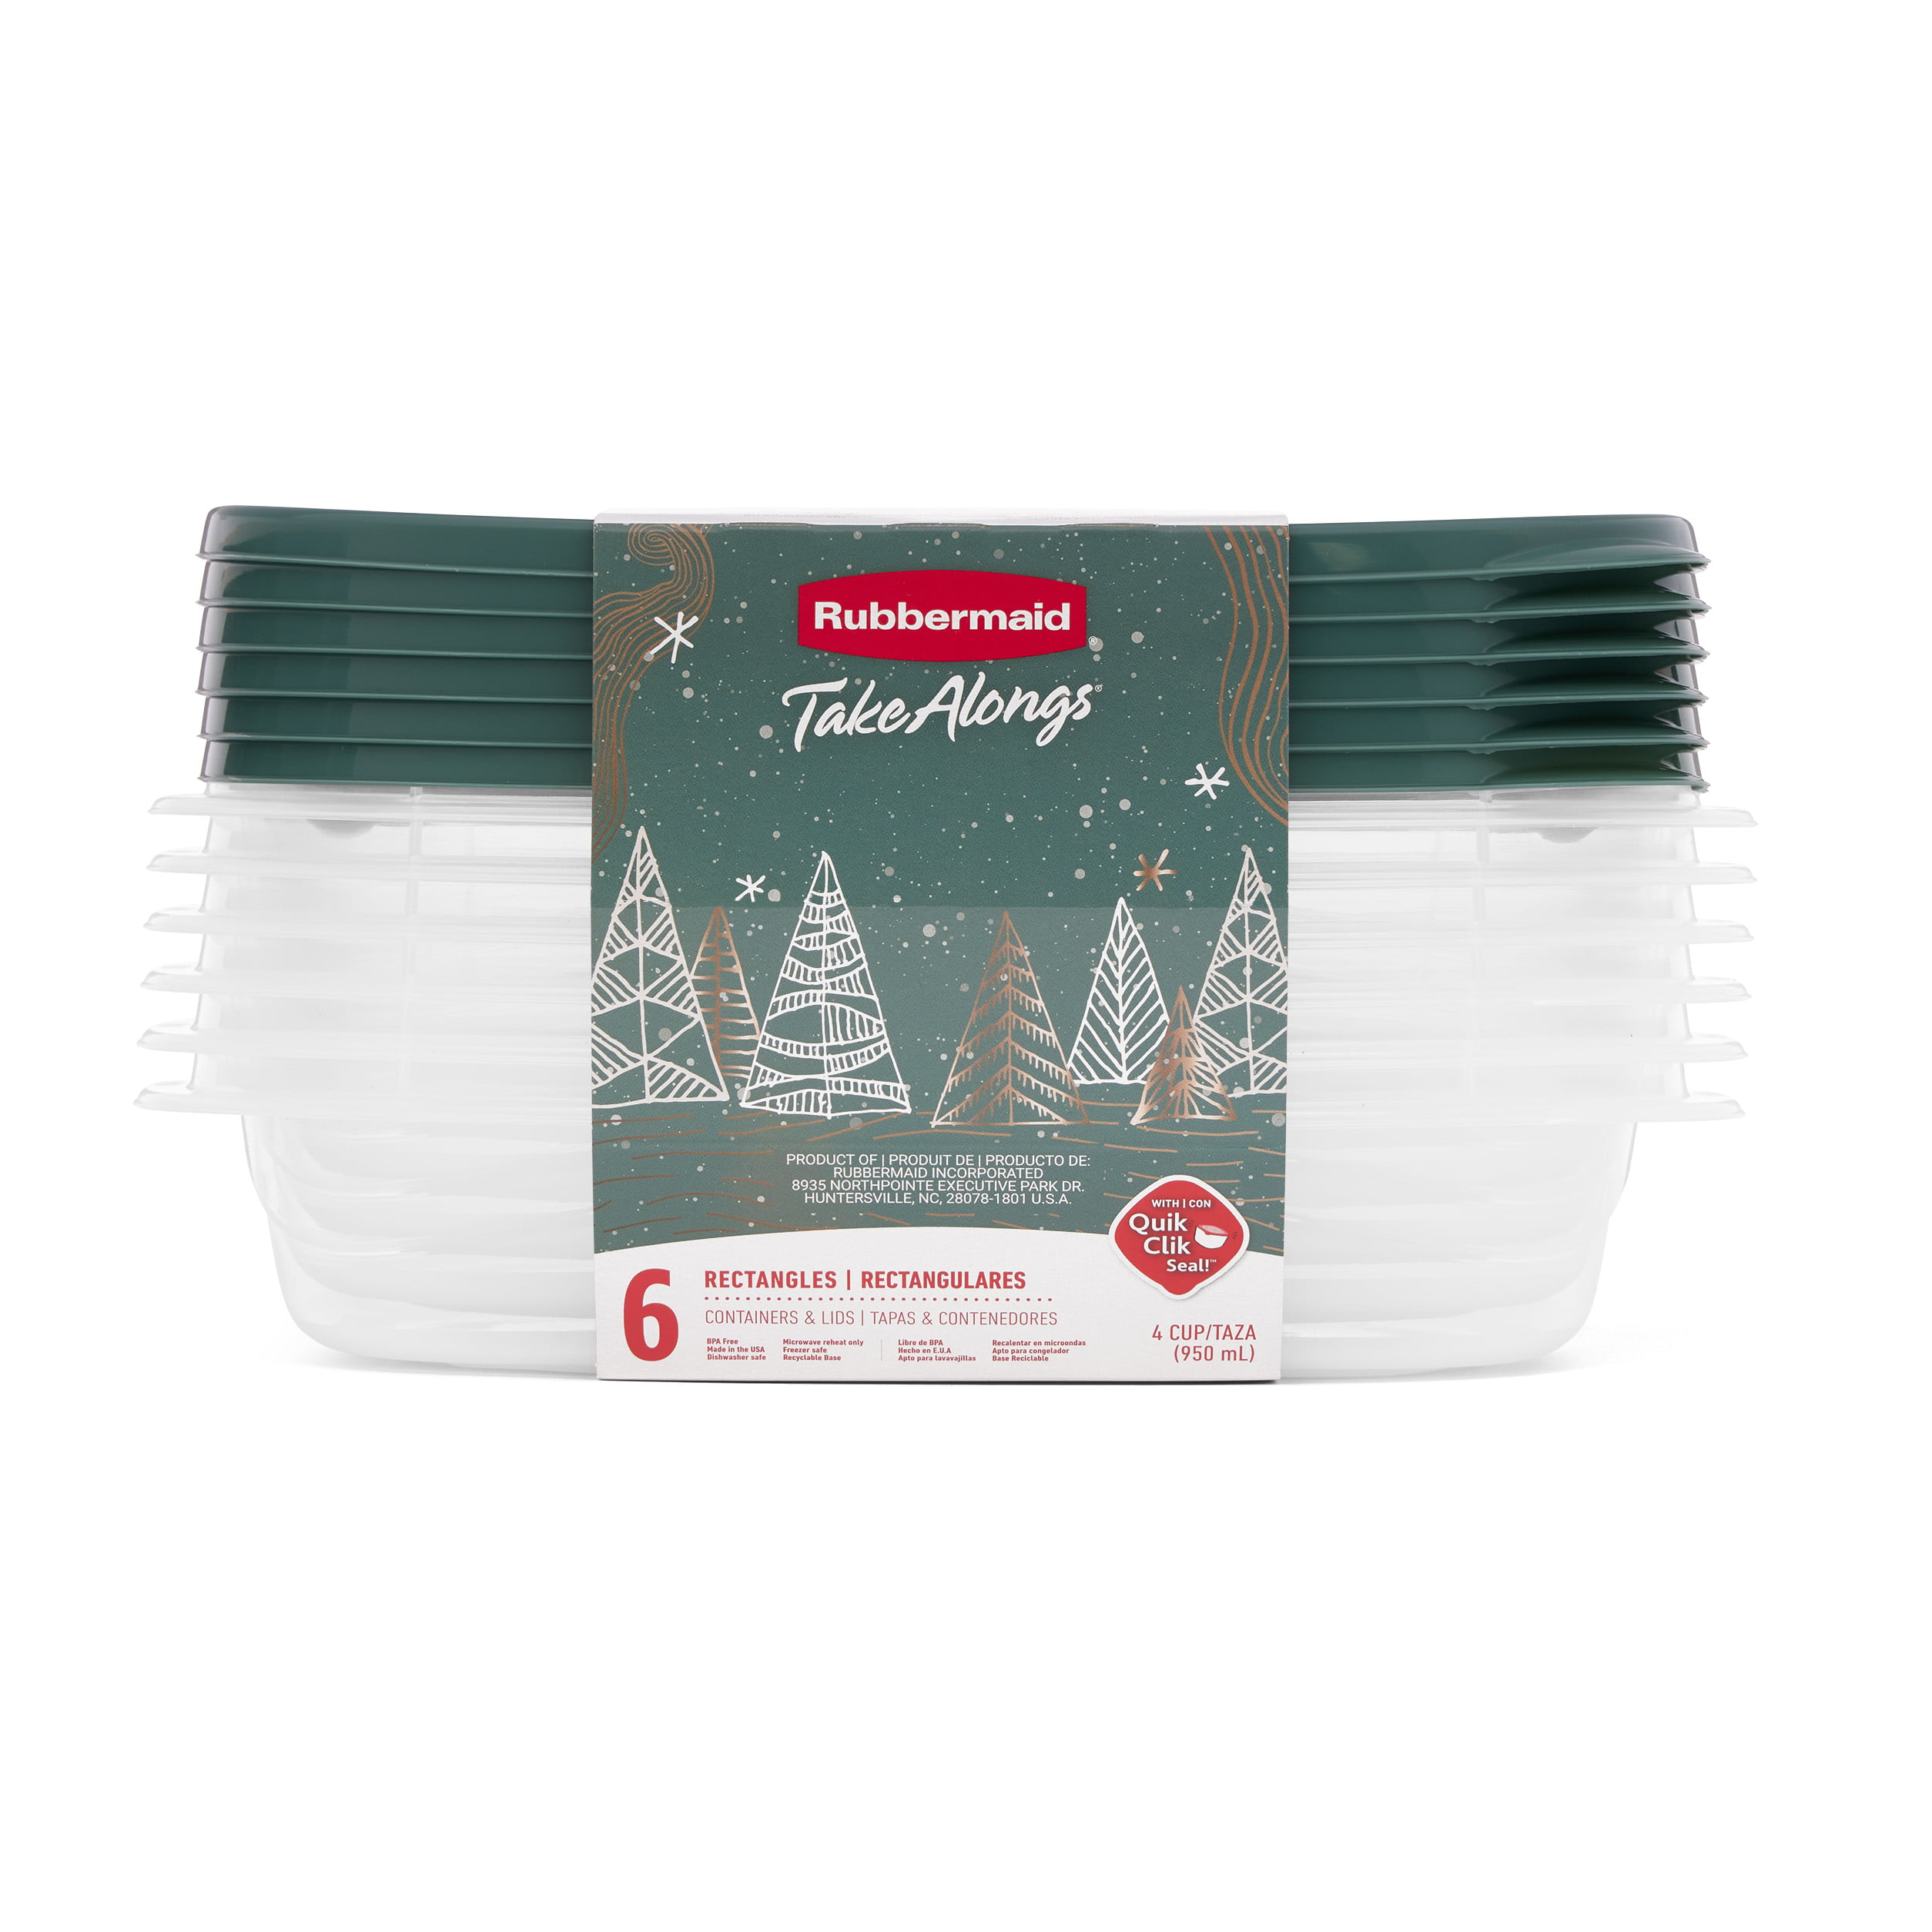 Rubbermaid TakeAlongs 4 Cup Rectangle Food Storage Containers, Set of 6, Blue Spruce - image 1 of 5